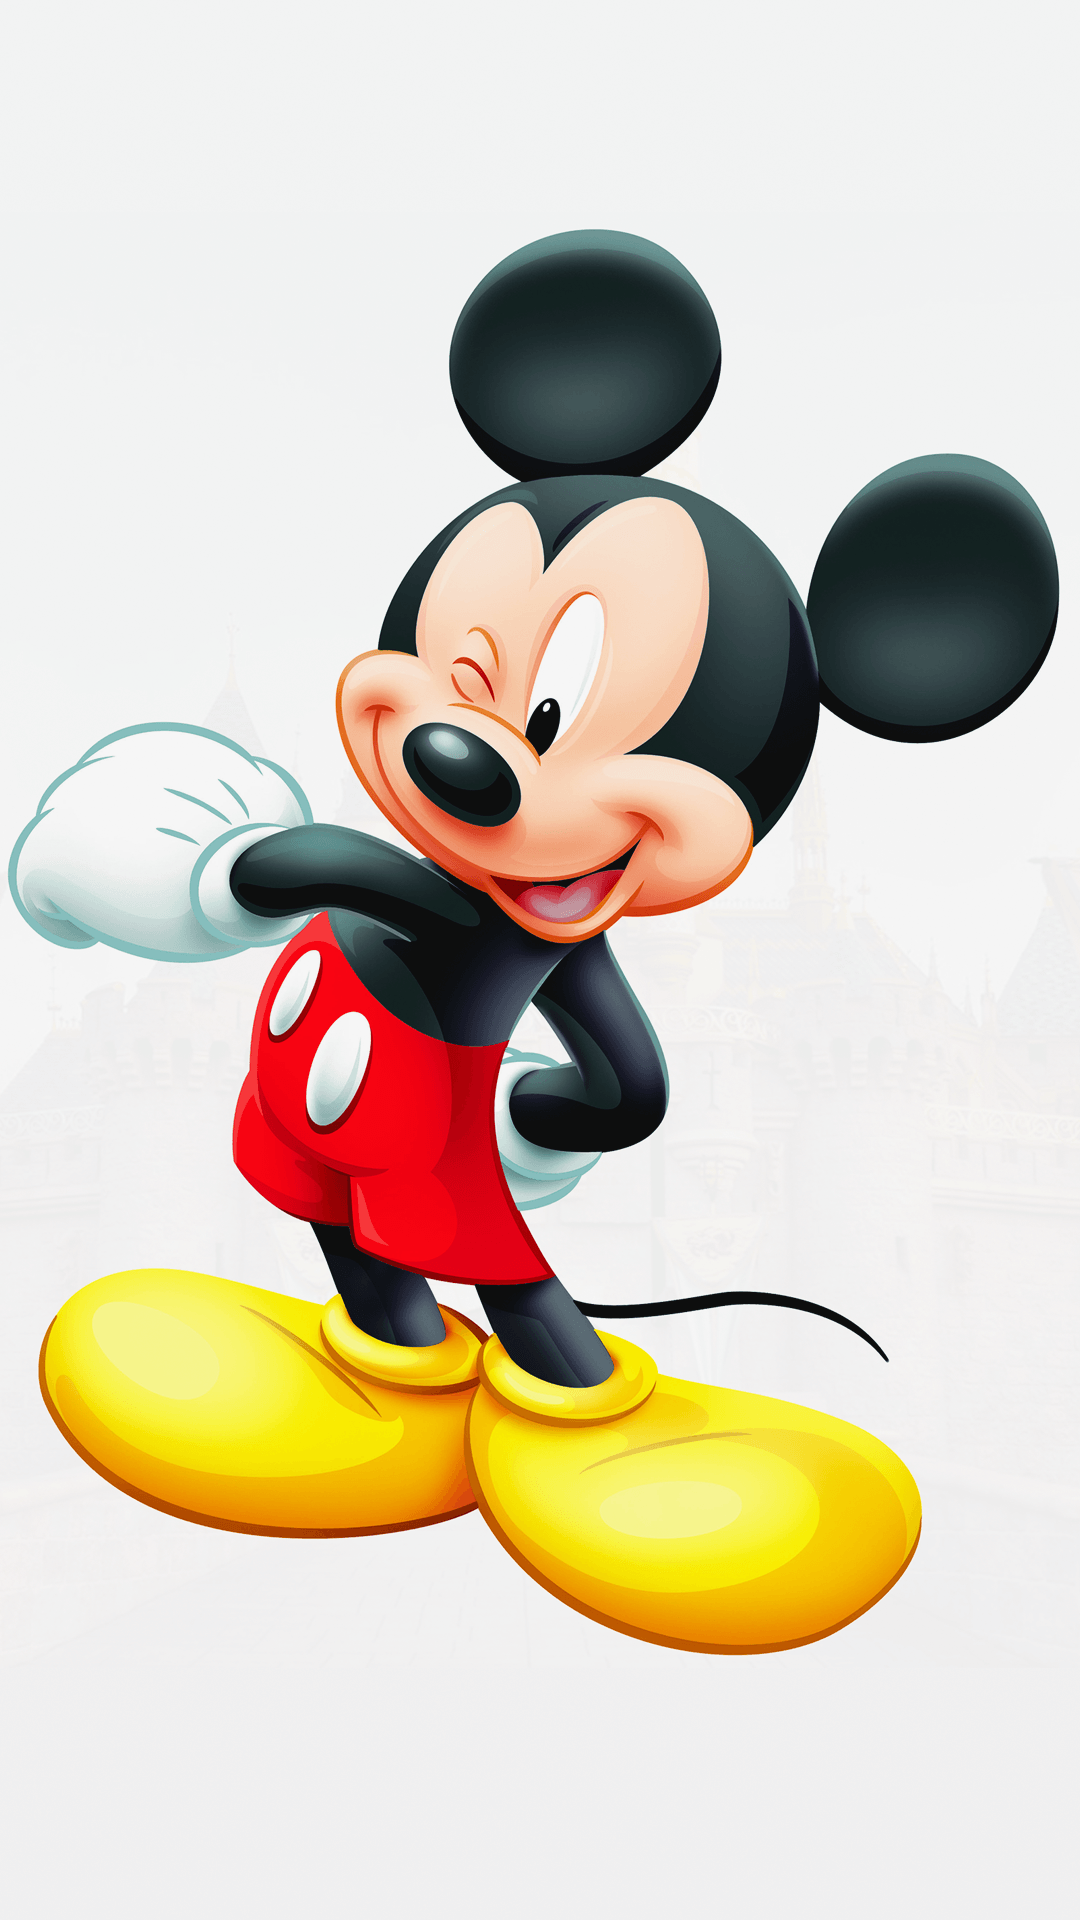 Mickey Mouse Cartoon Wallpapers - Top